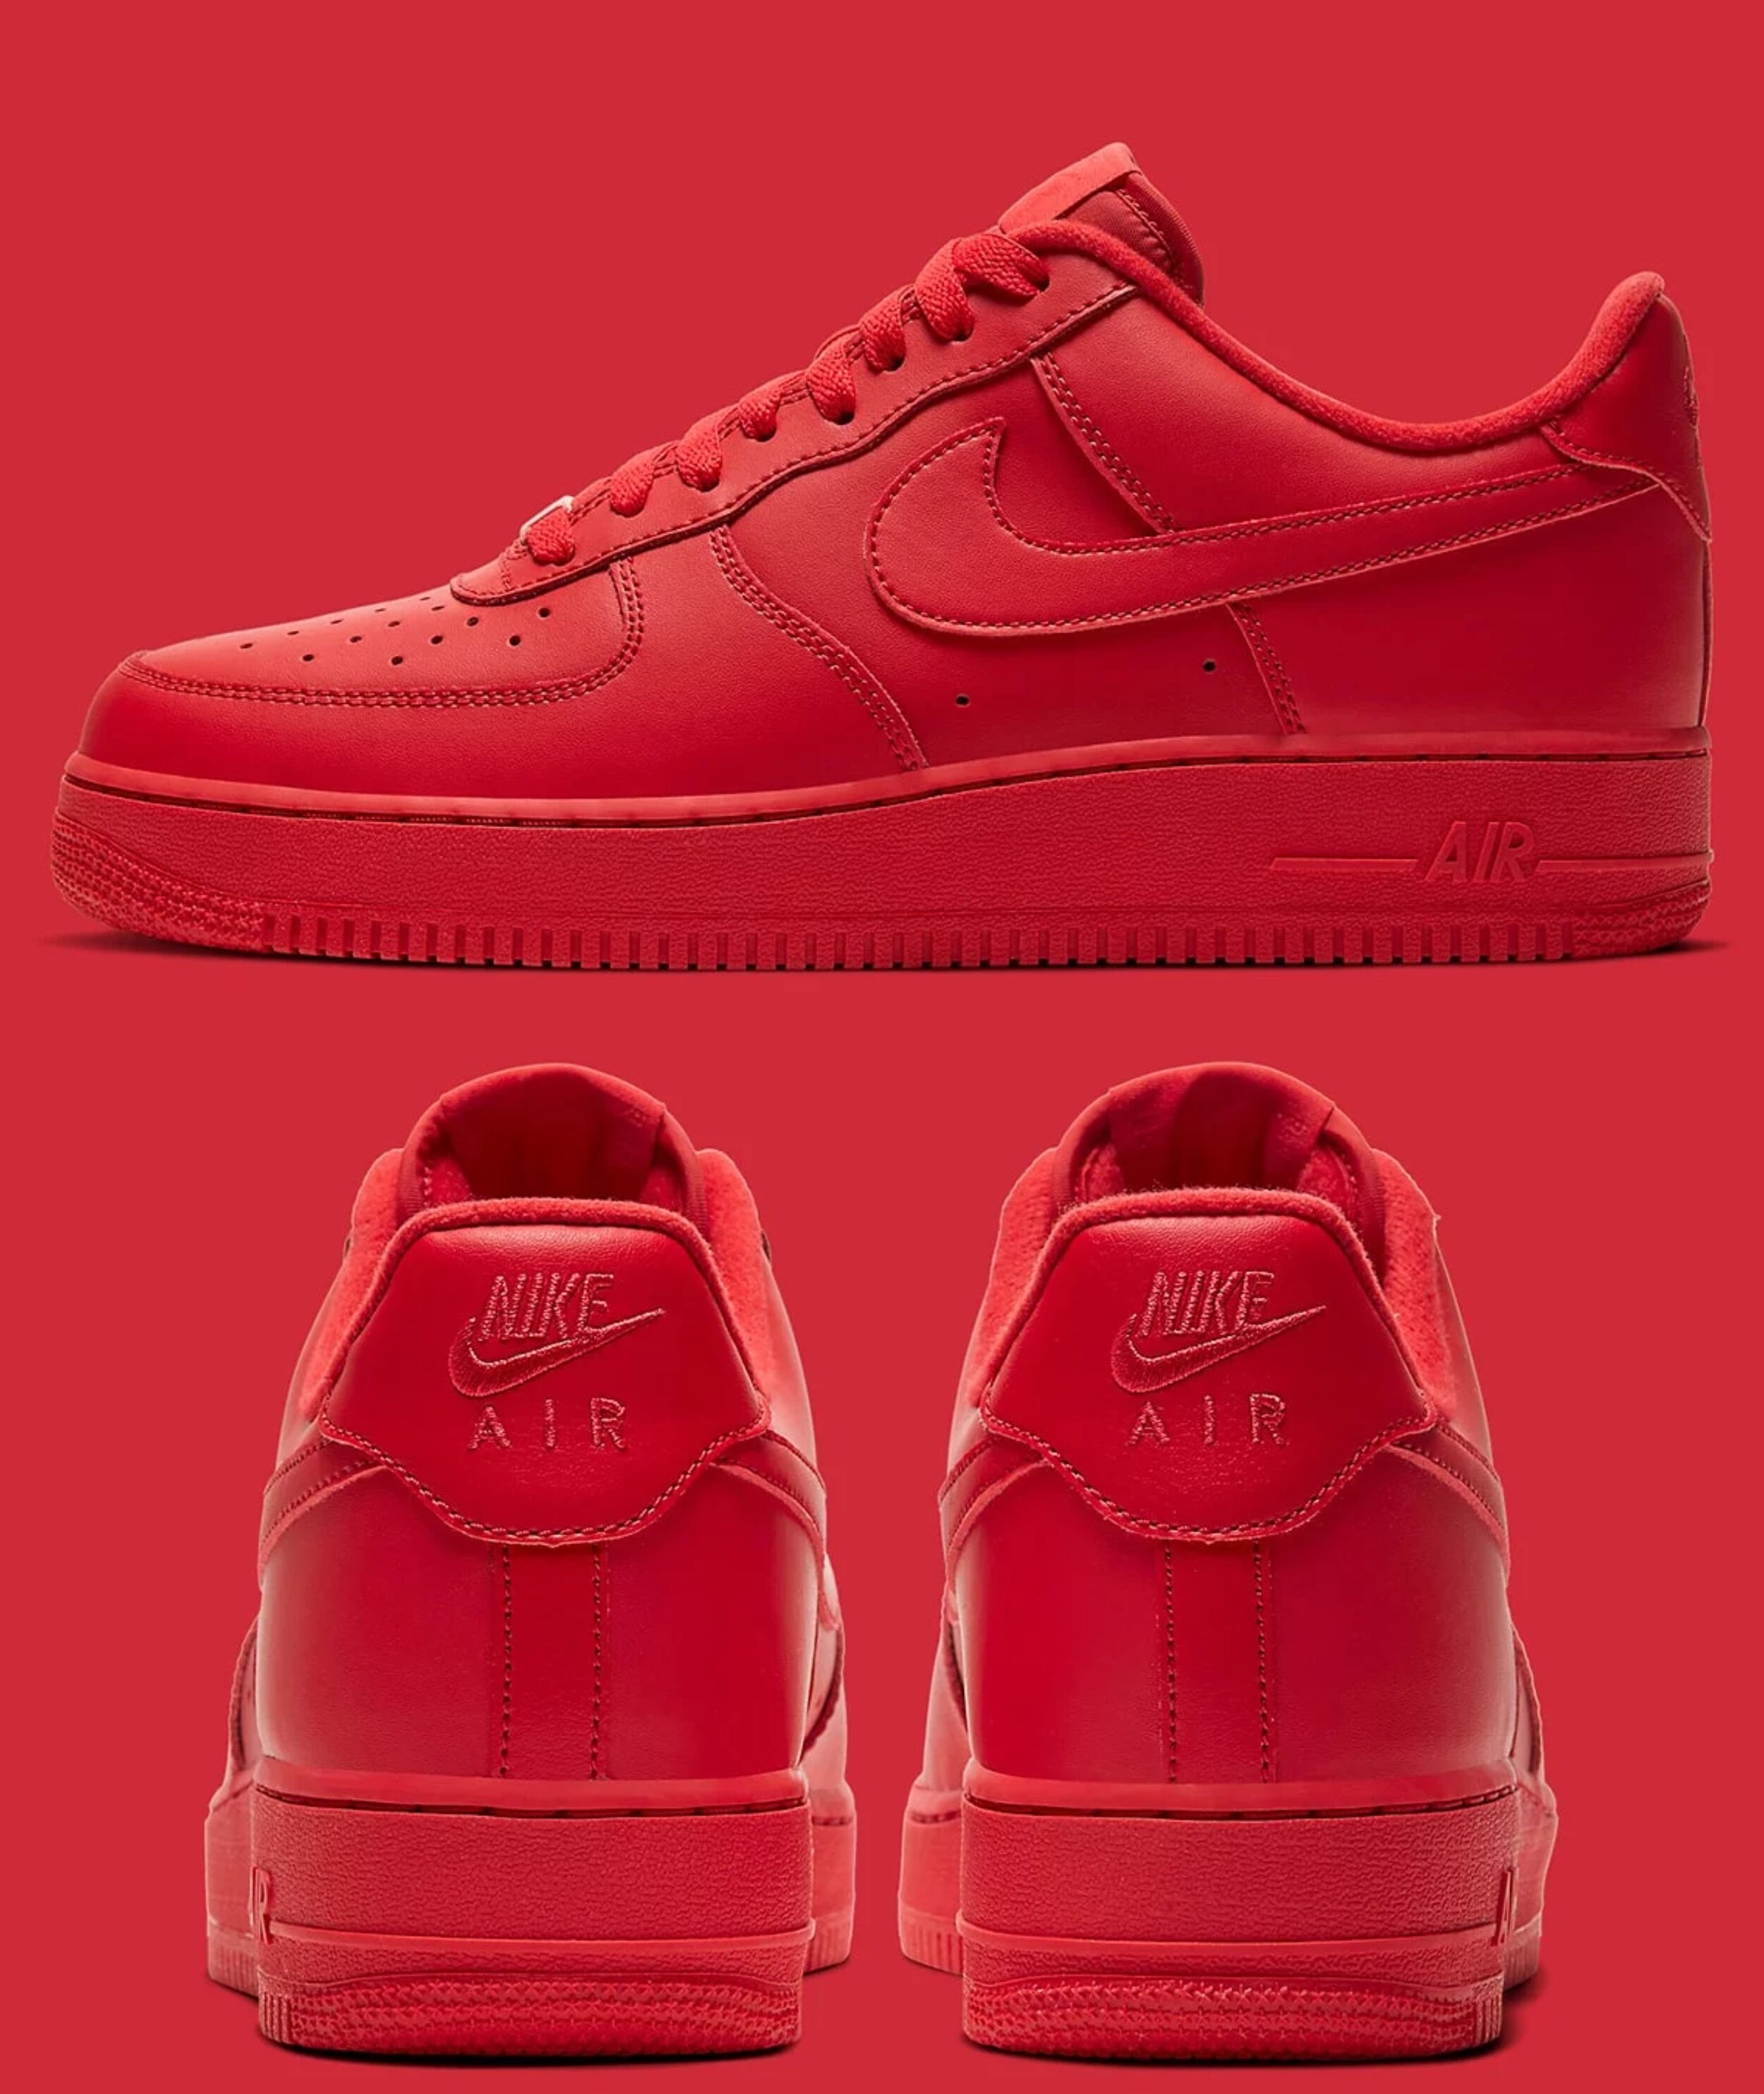 Nike Air Force 1 Low Triple Red for Sale